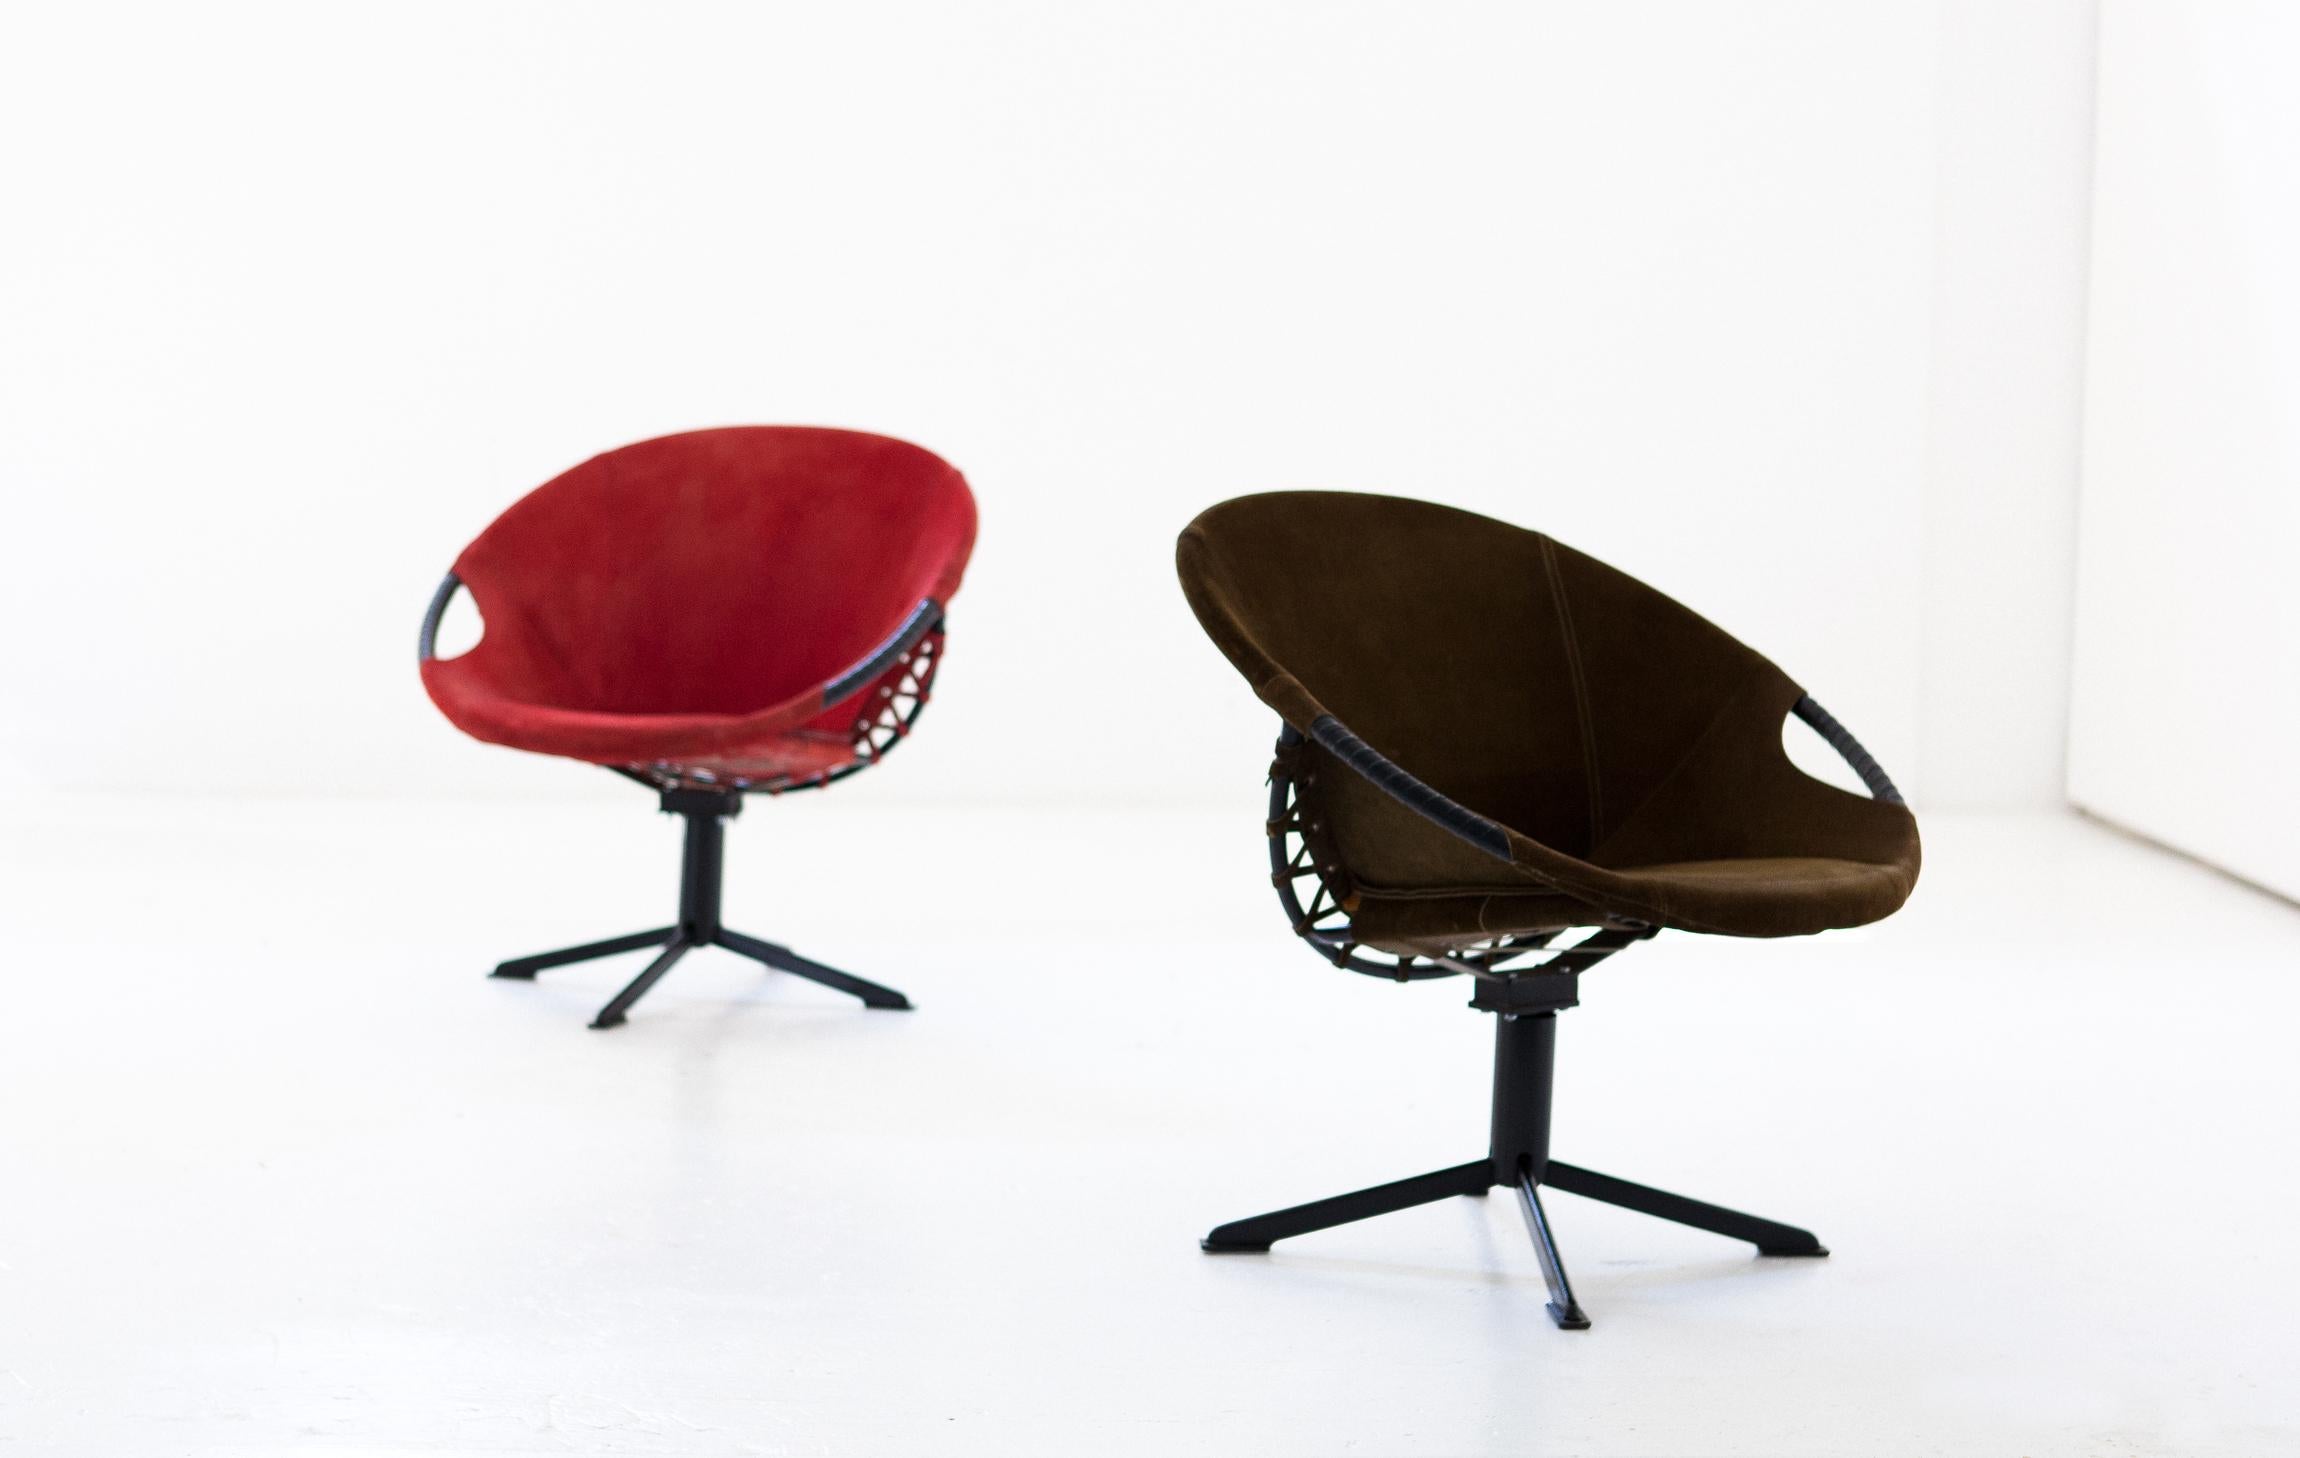 Italian Pair of Olive Green and Red Natural Suede Leather Lounge Chairs, 1960s